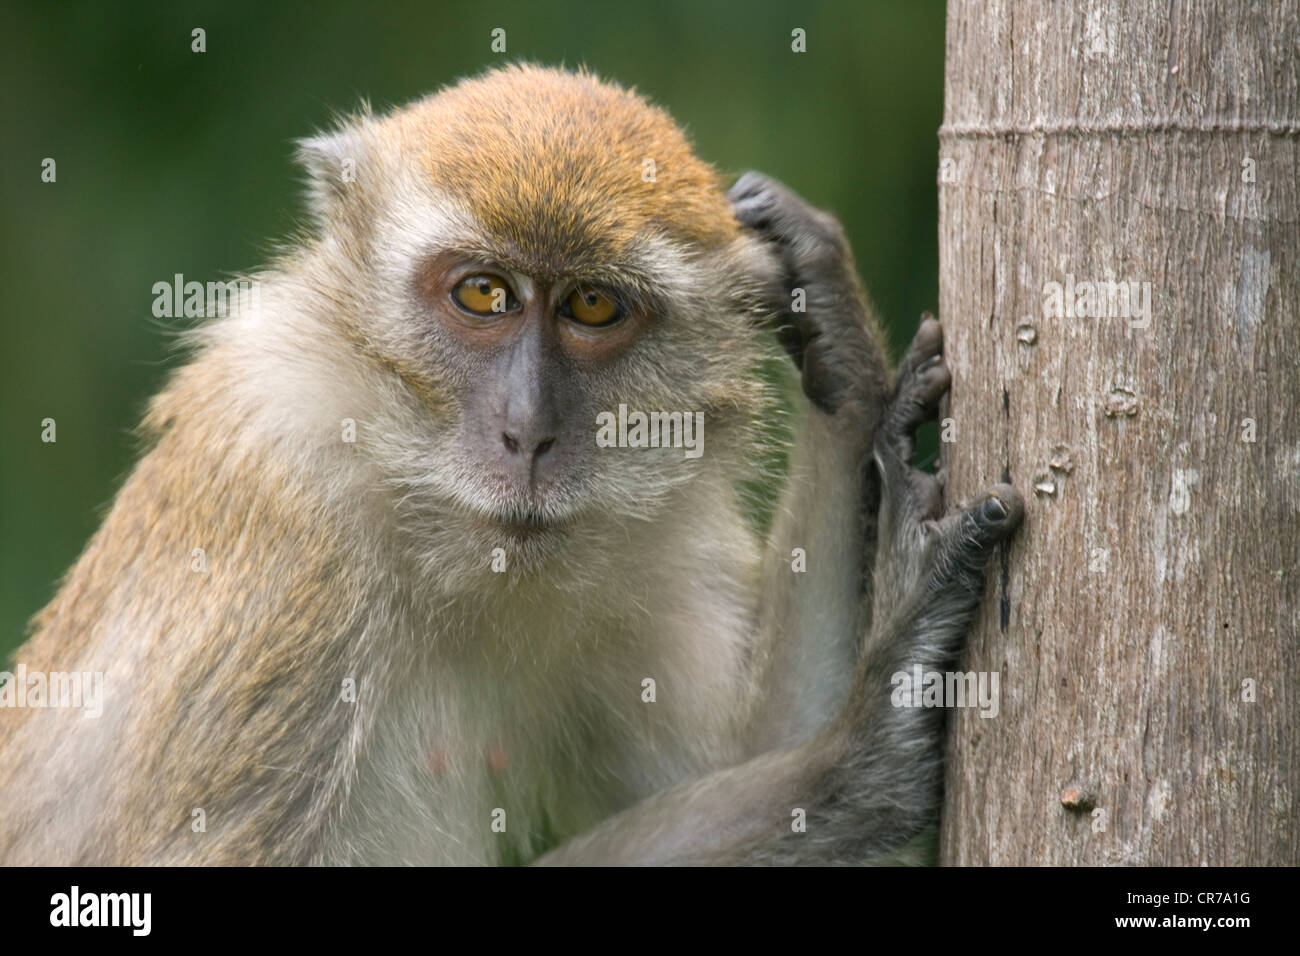 Monkey in the wild scratching its head, Malaysia Stock Photo